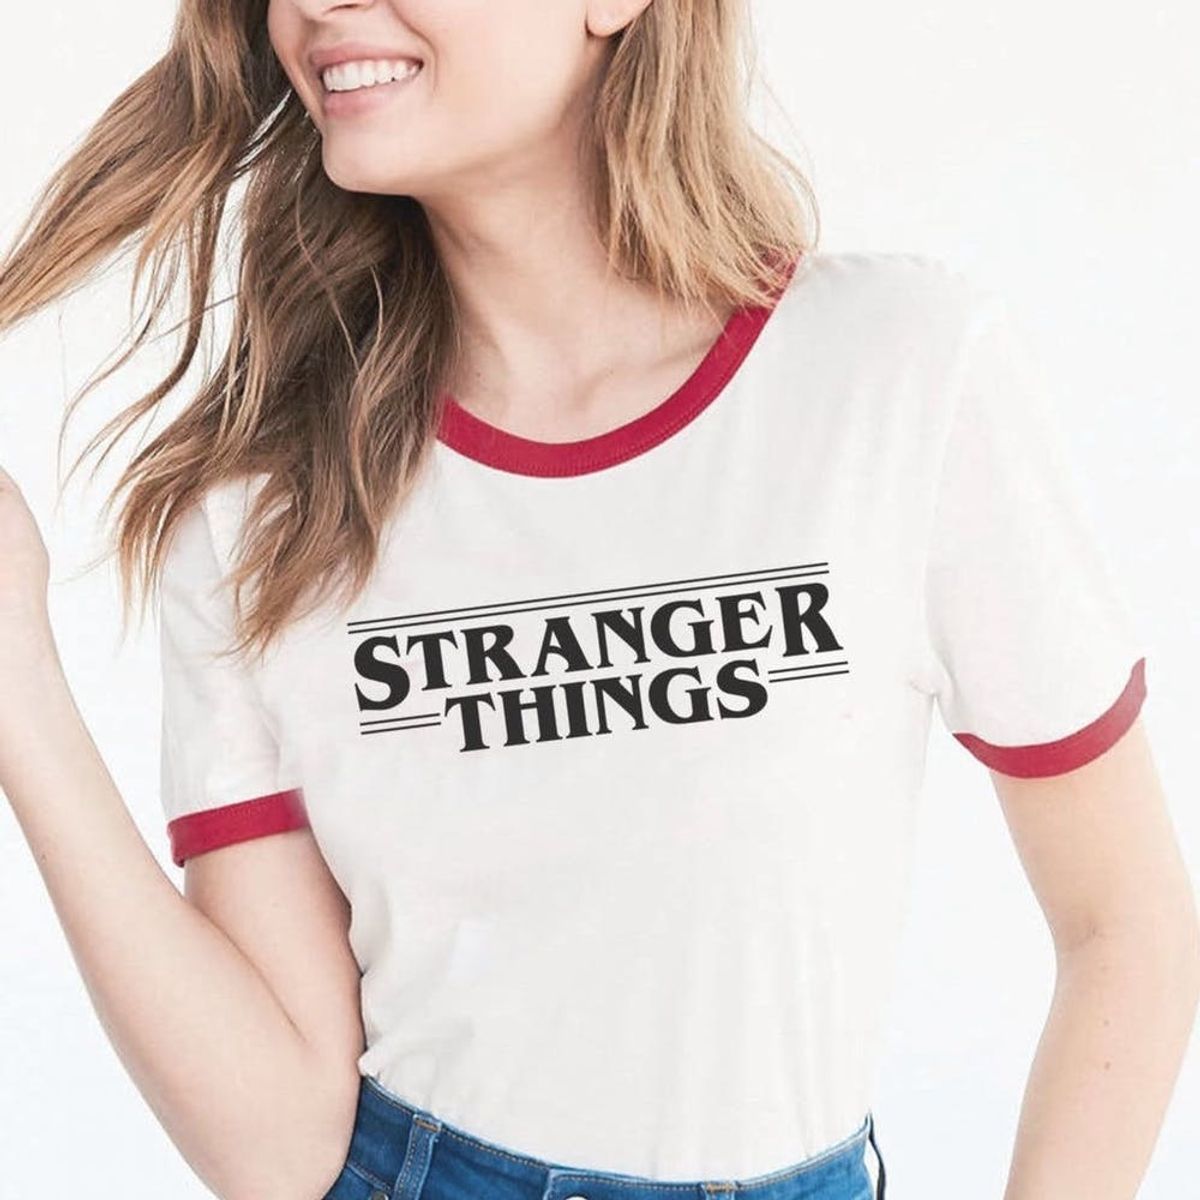 28 Gift Ideas for Your “Stranger Things”-Obsessed BFF